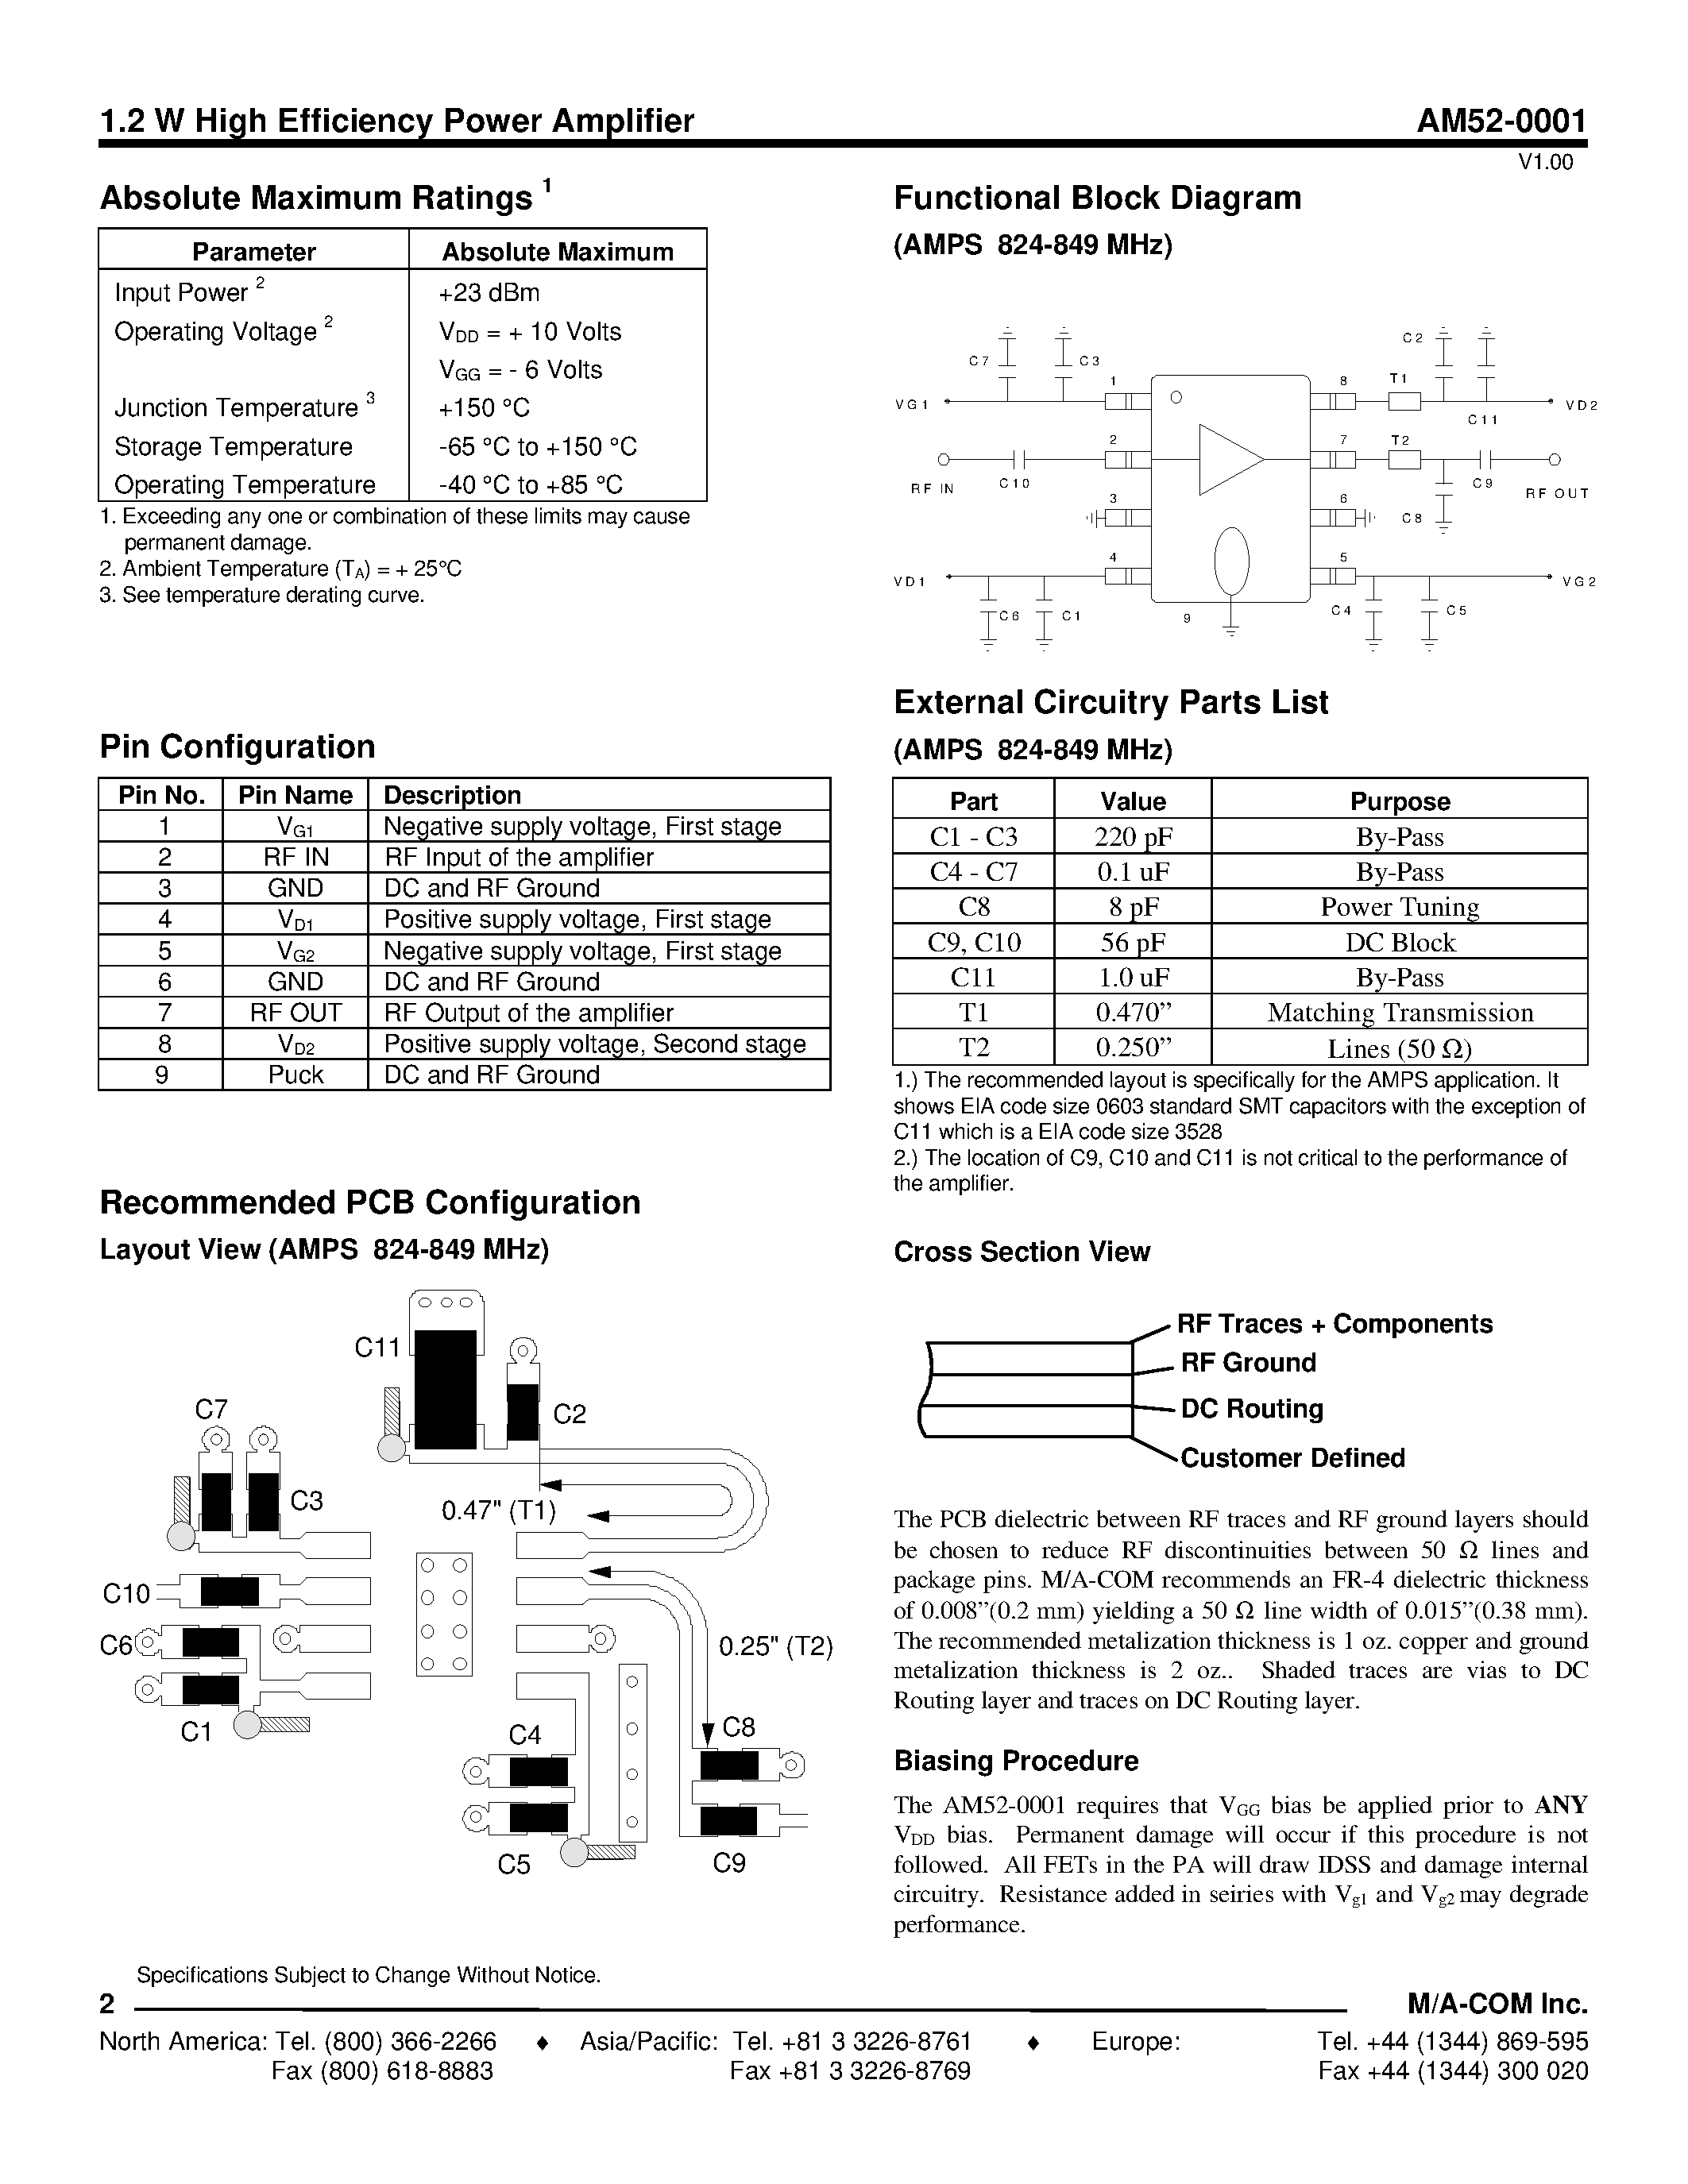 Datasheet AM52-0001 - 1.2 W High Efficiency Power Amplifier 800 - 960 MHz page 2